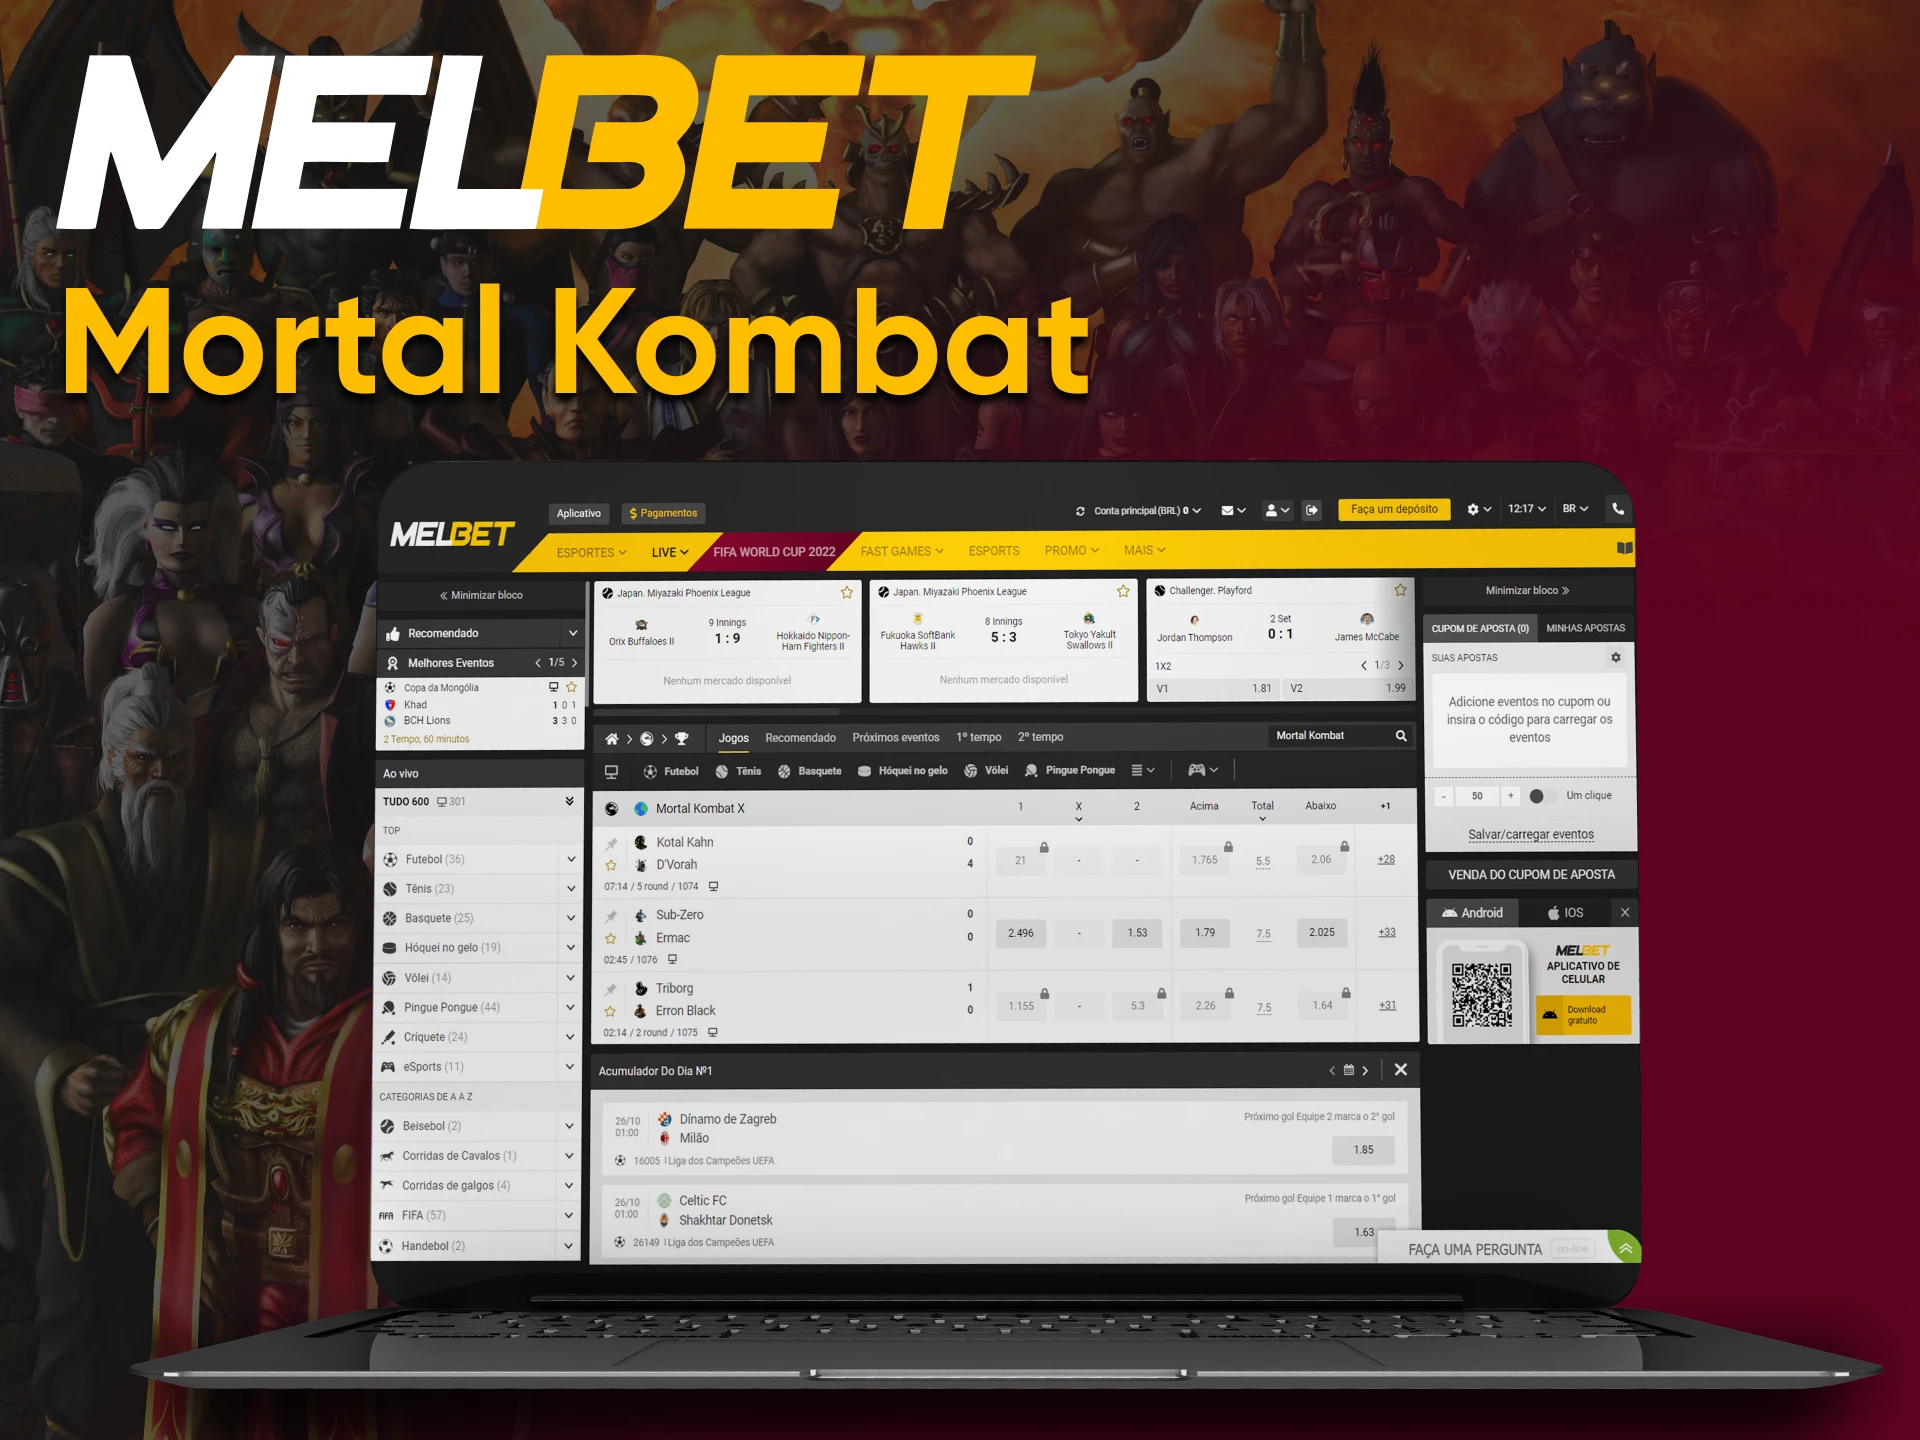 On the Melbet website, you can play Mortal Kombat games.